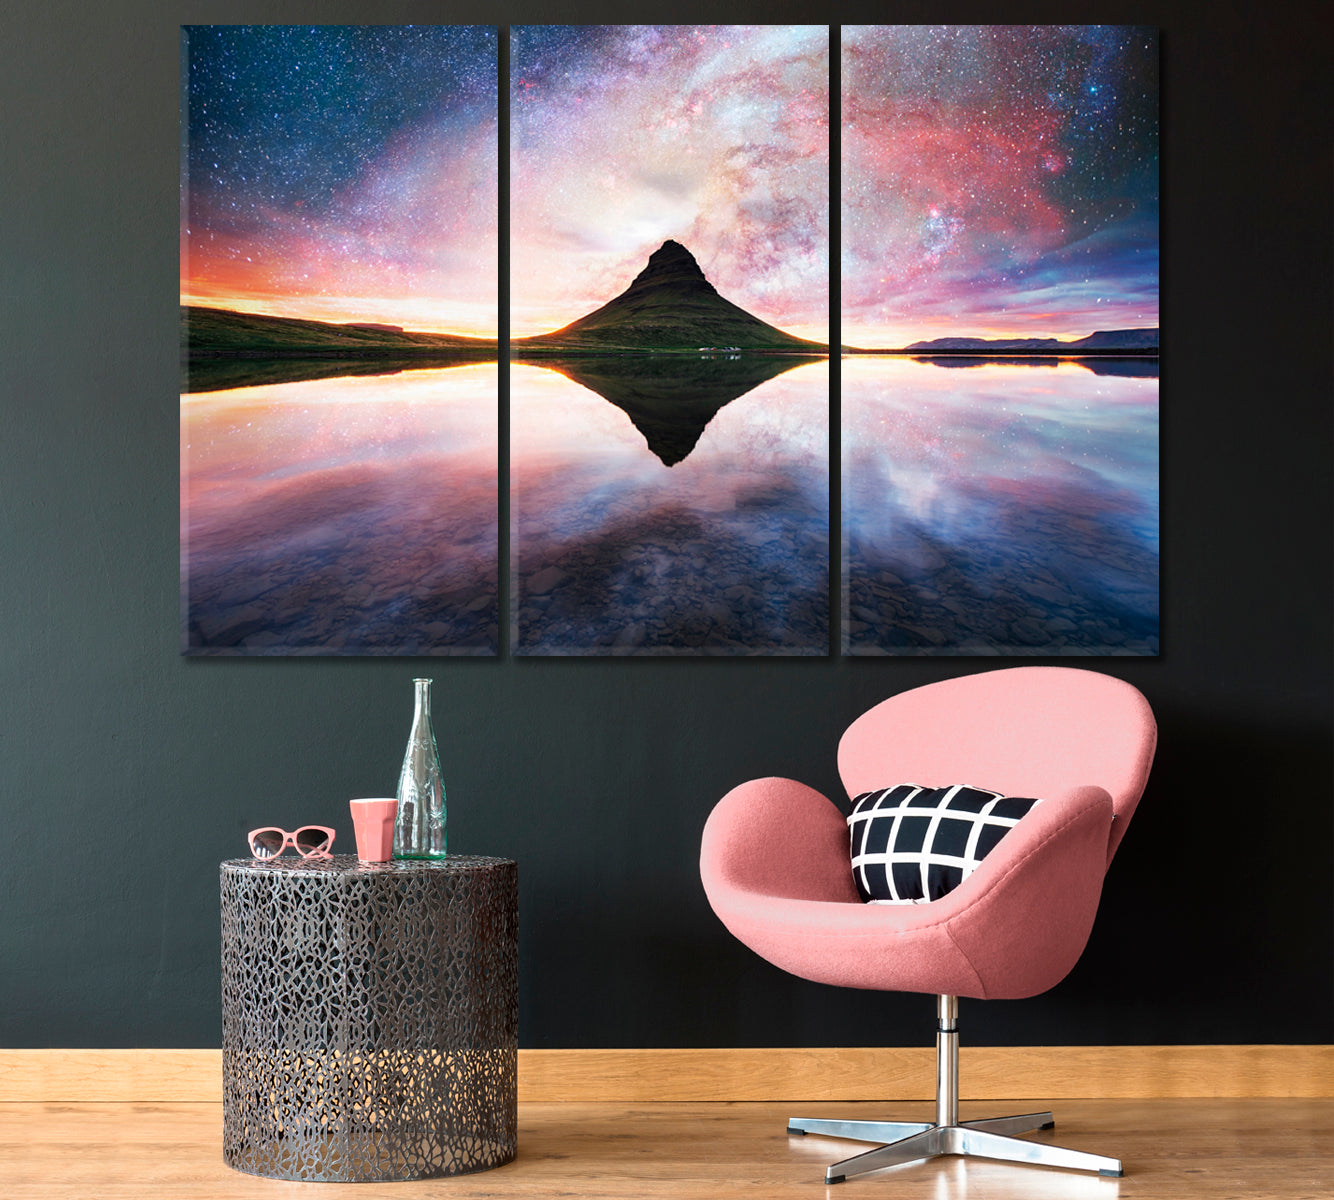 Kirkjufell Mountain Iceland Canvas Print ArtLexy 5 Panels 36"x24" inches 